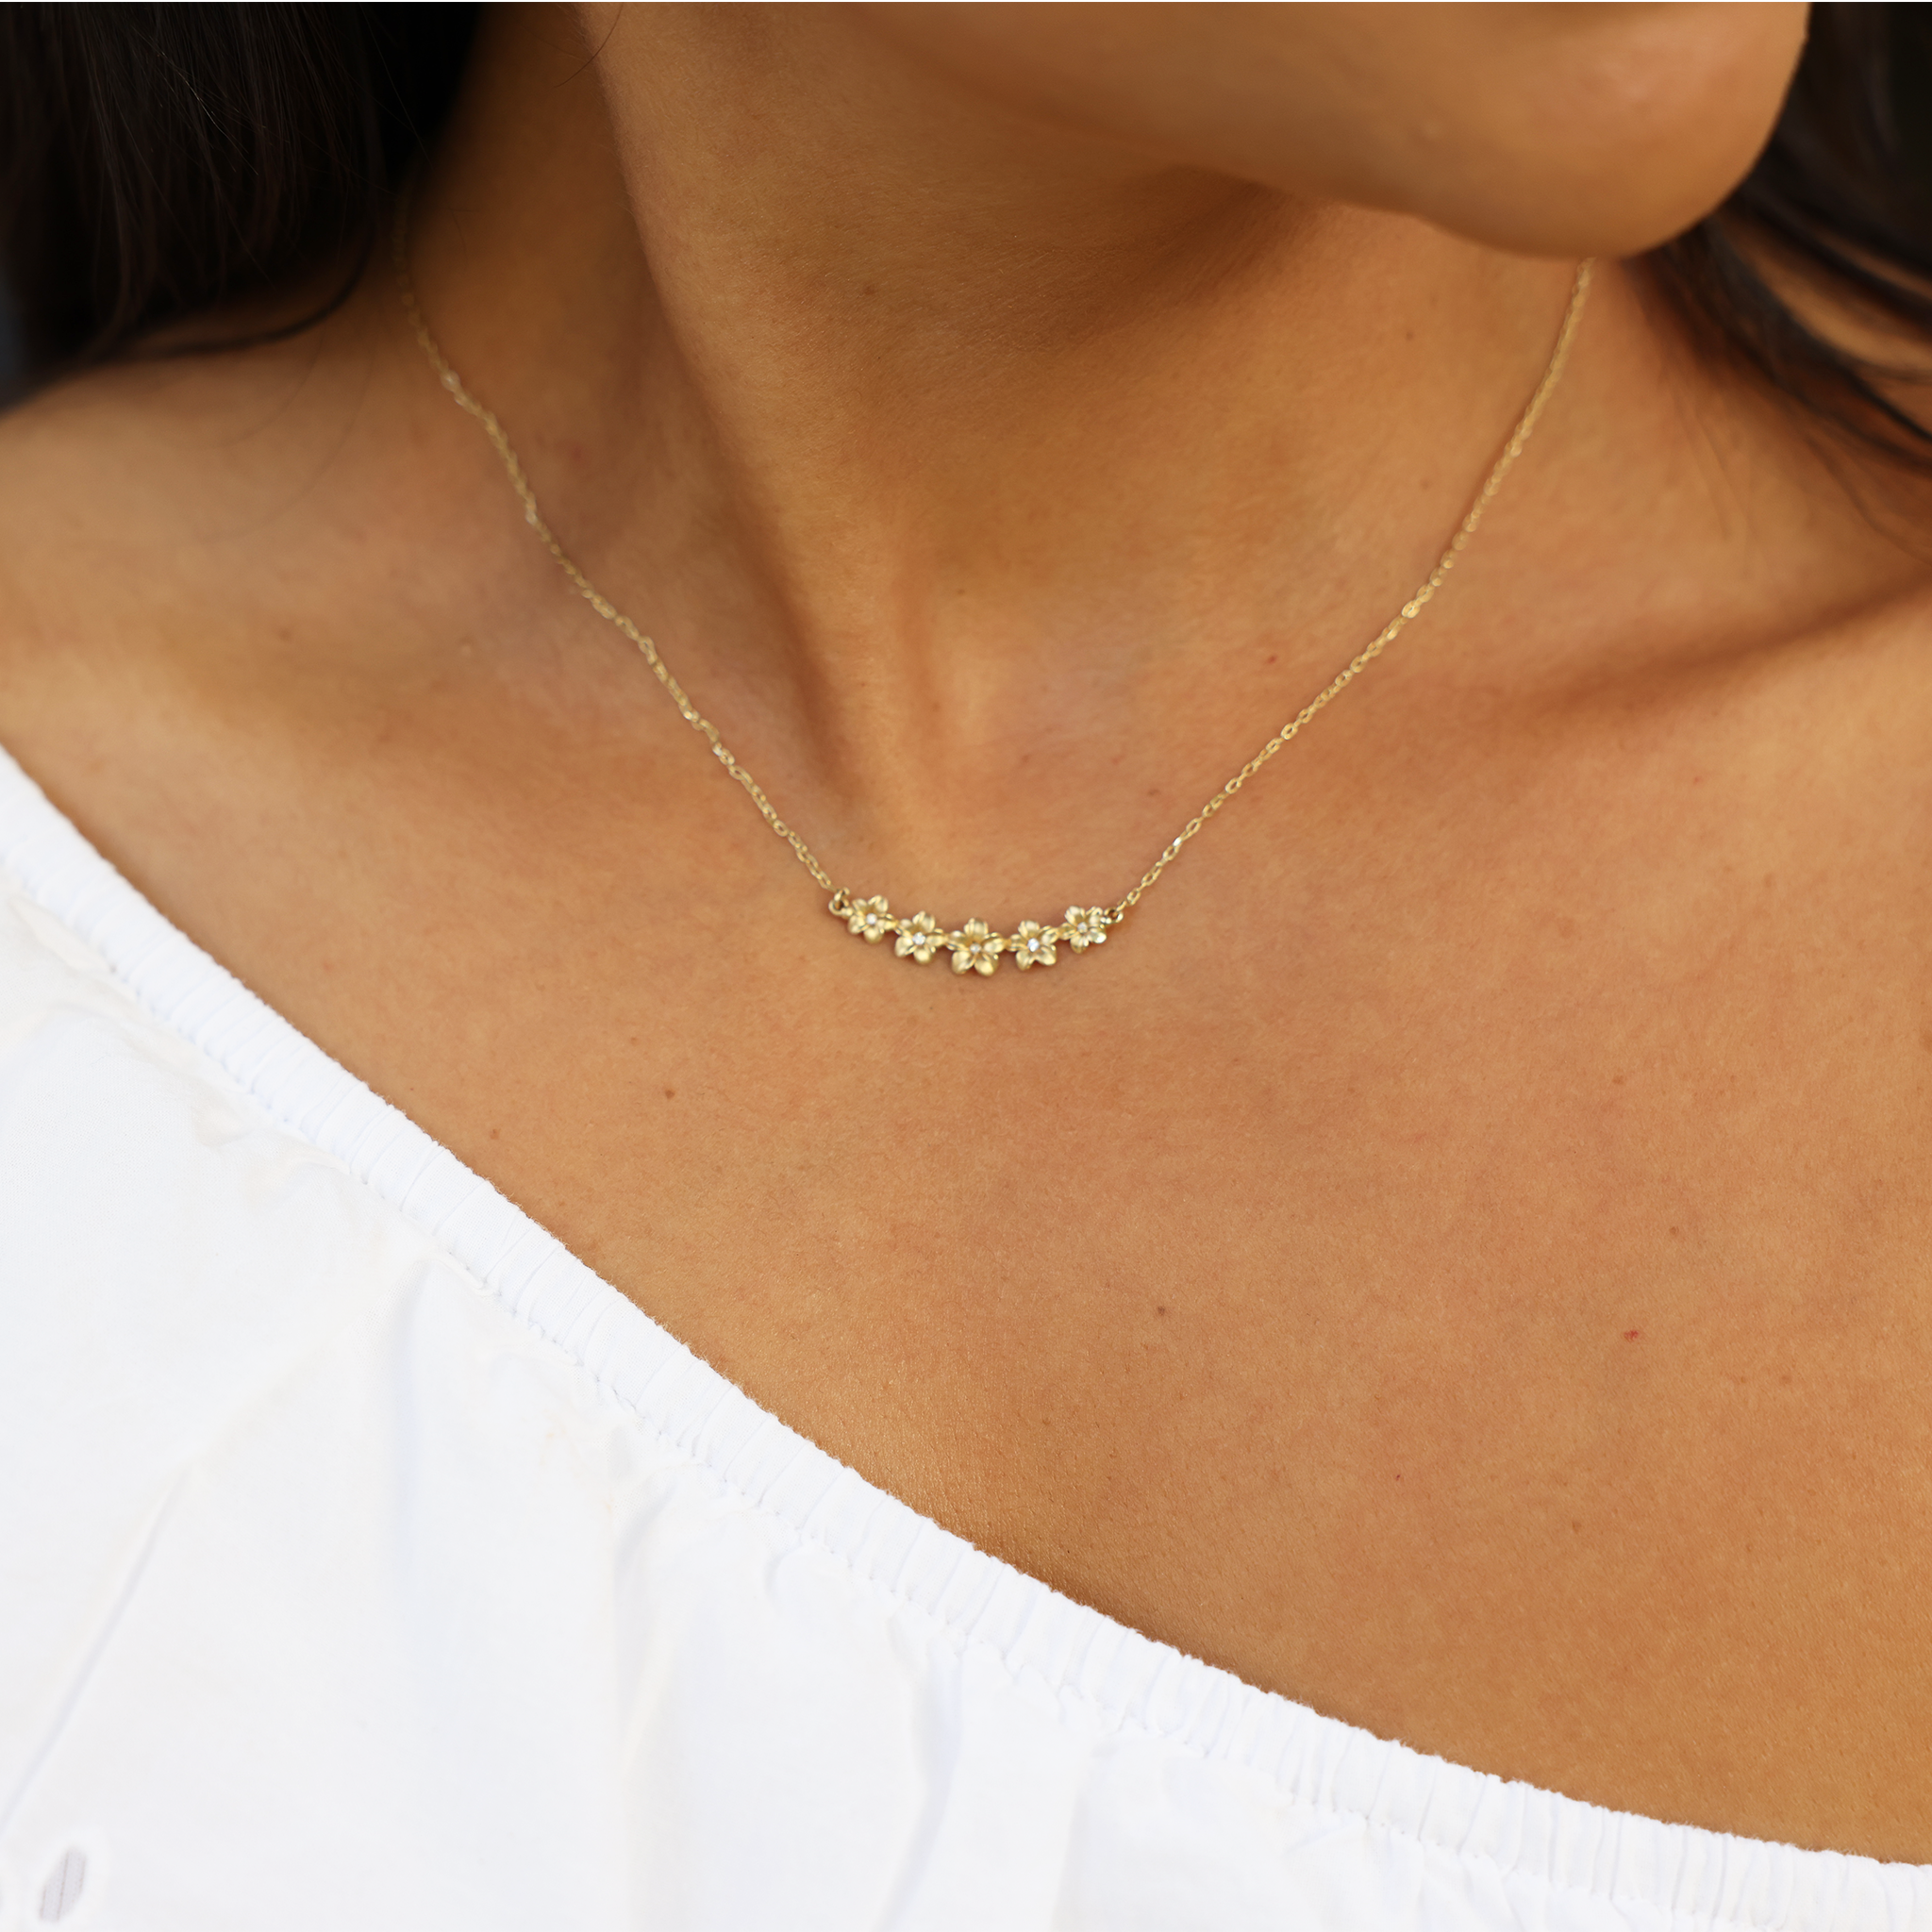 16" Plumeria Necklace in Gold with Diamonds - 30mm